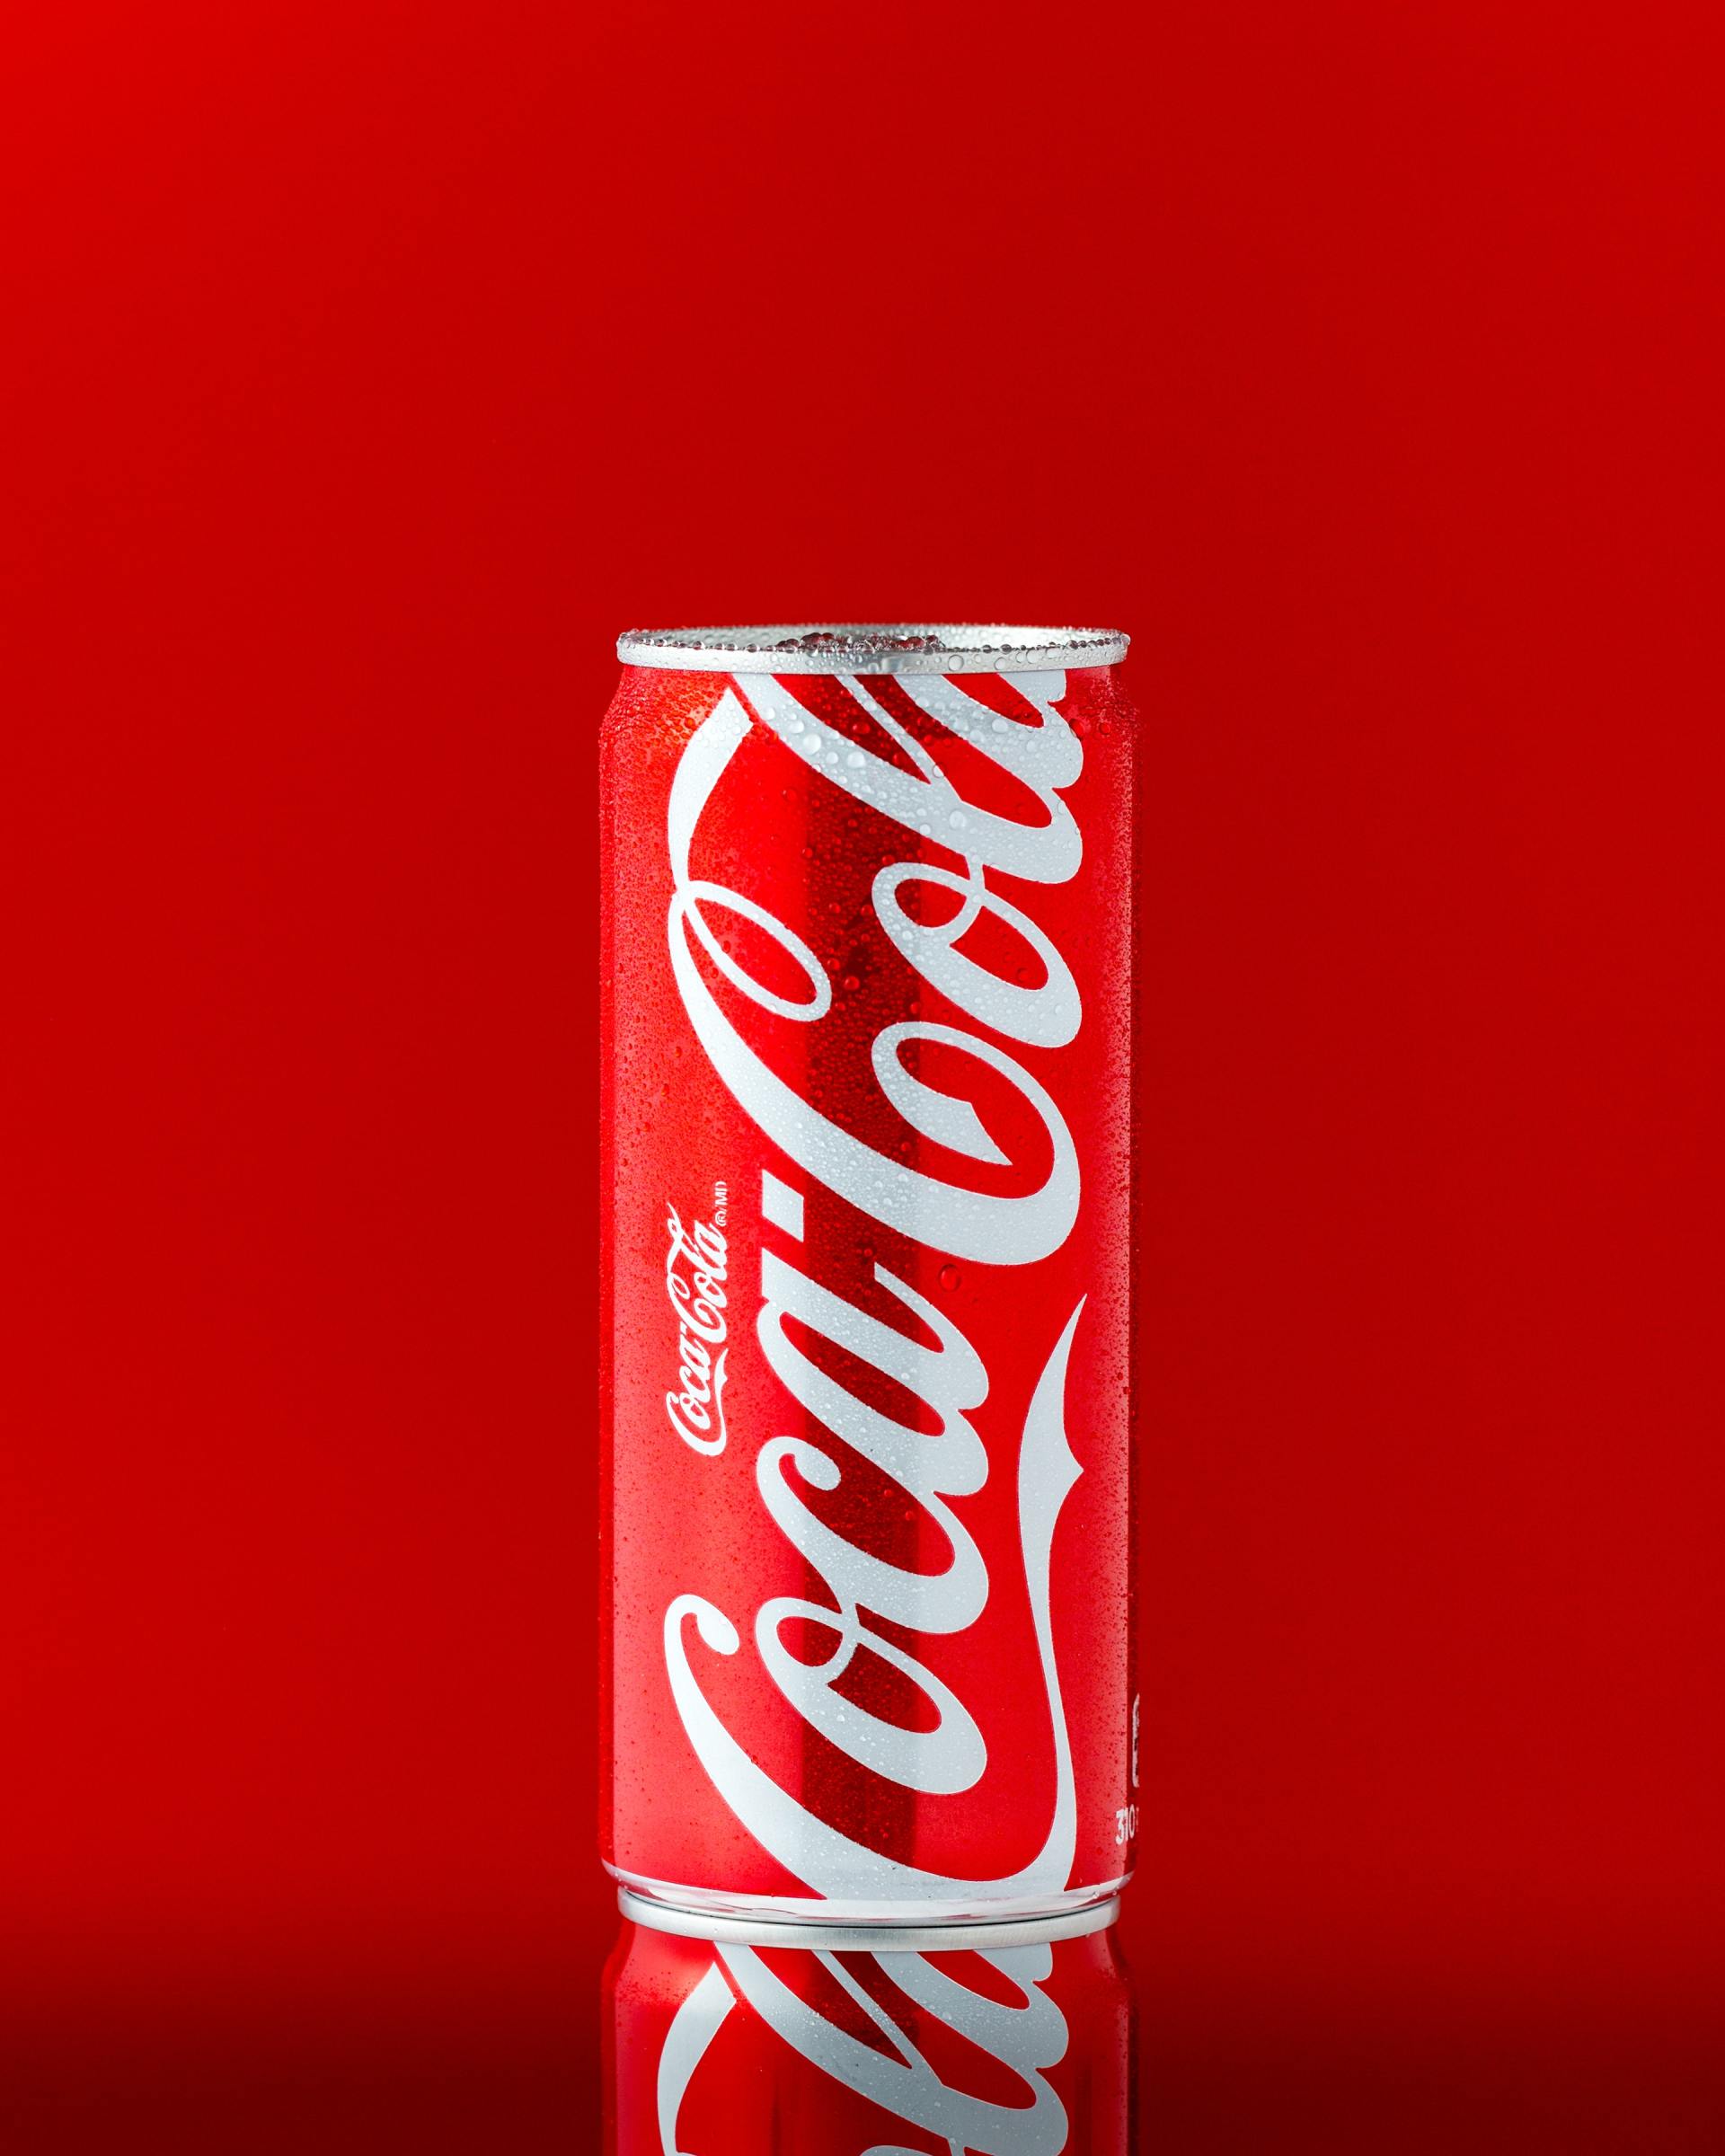 Coca Cola can on red background